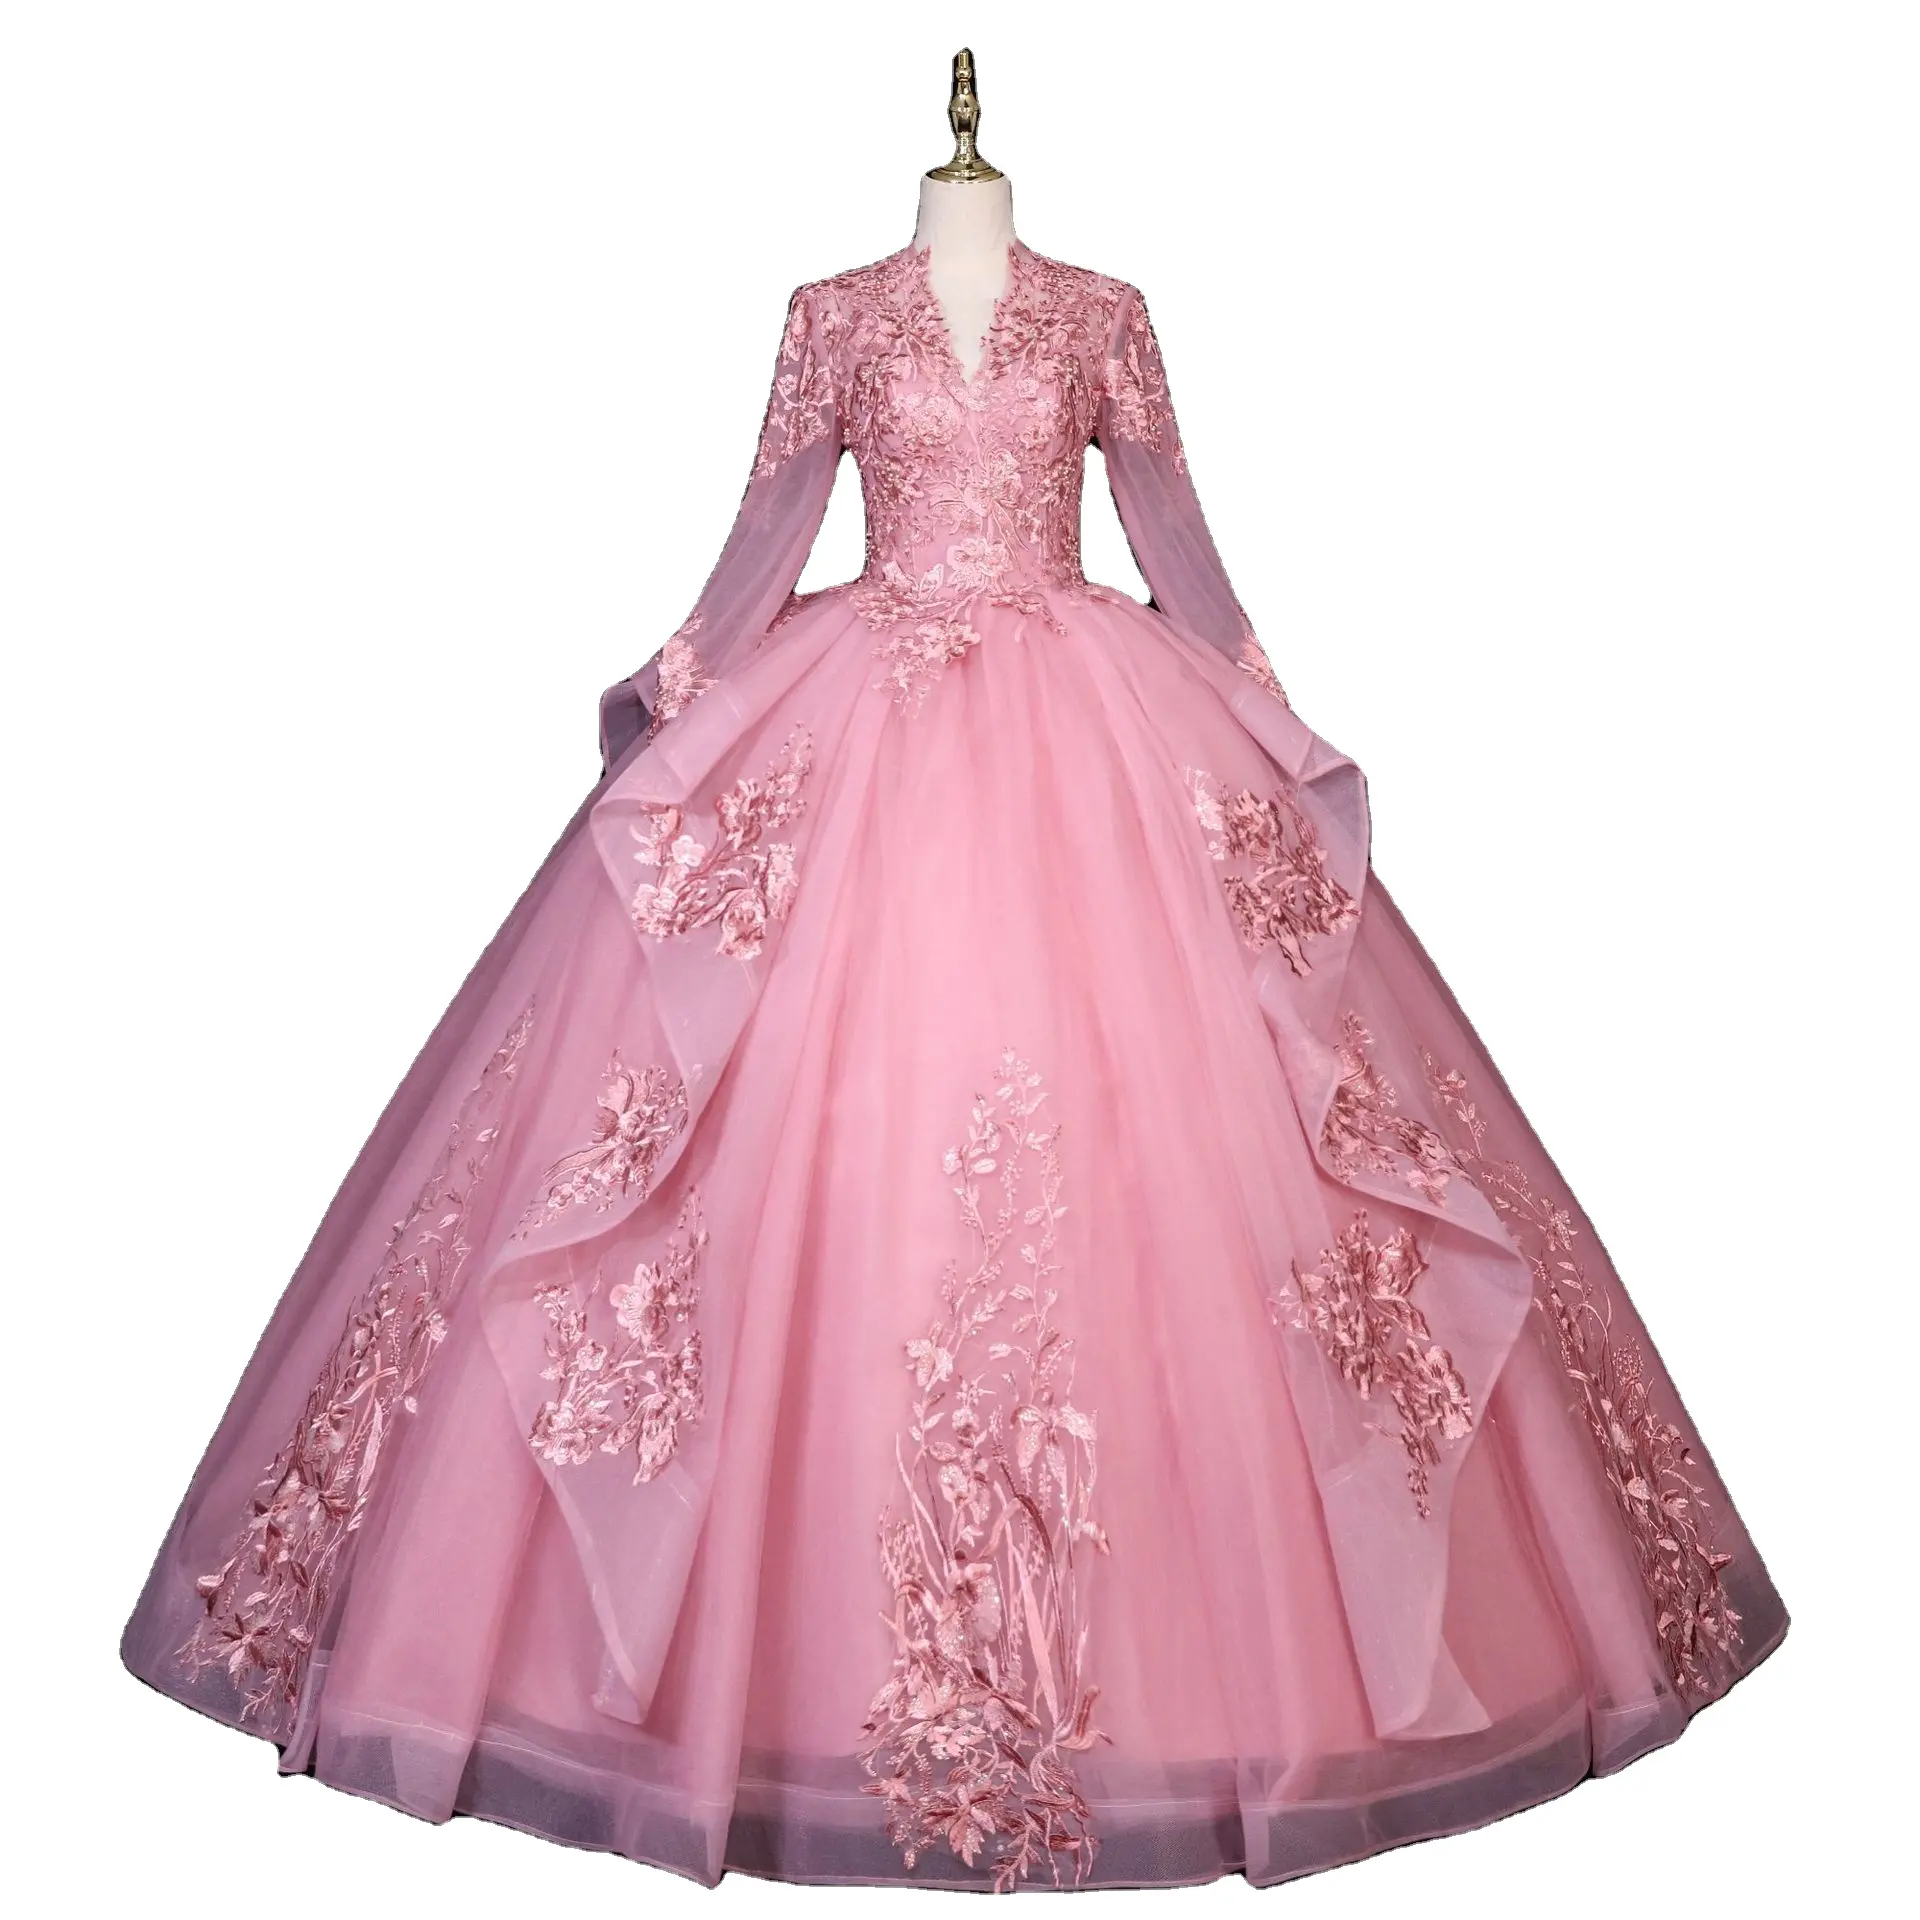 Modest Princess Ball Gown Formal Evening Prom Gowns Long Sleeves Quinceanera Dresses for Girls